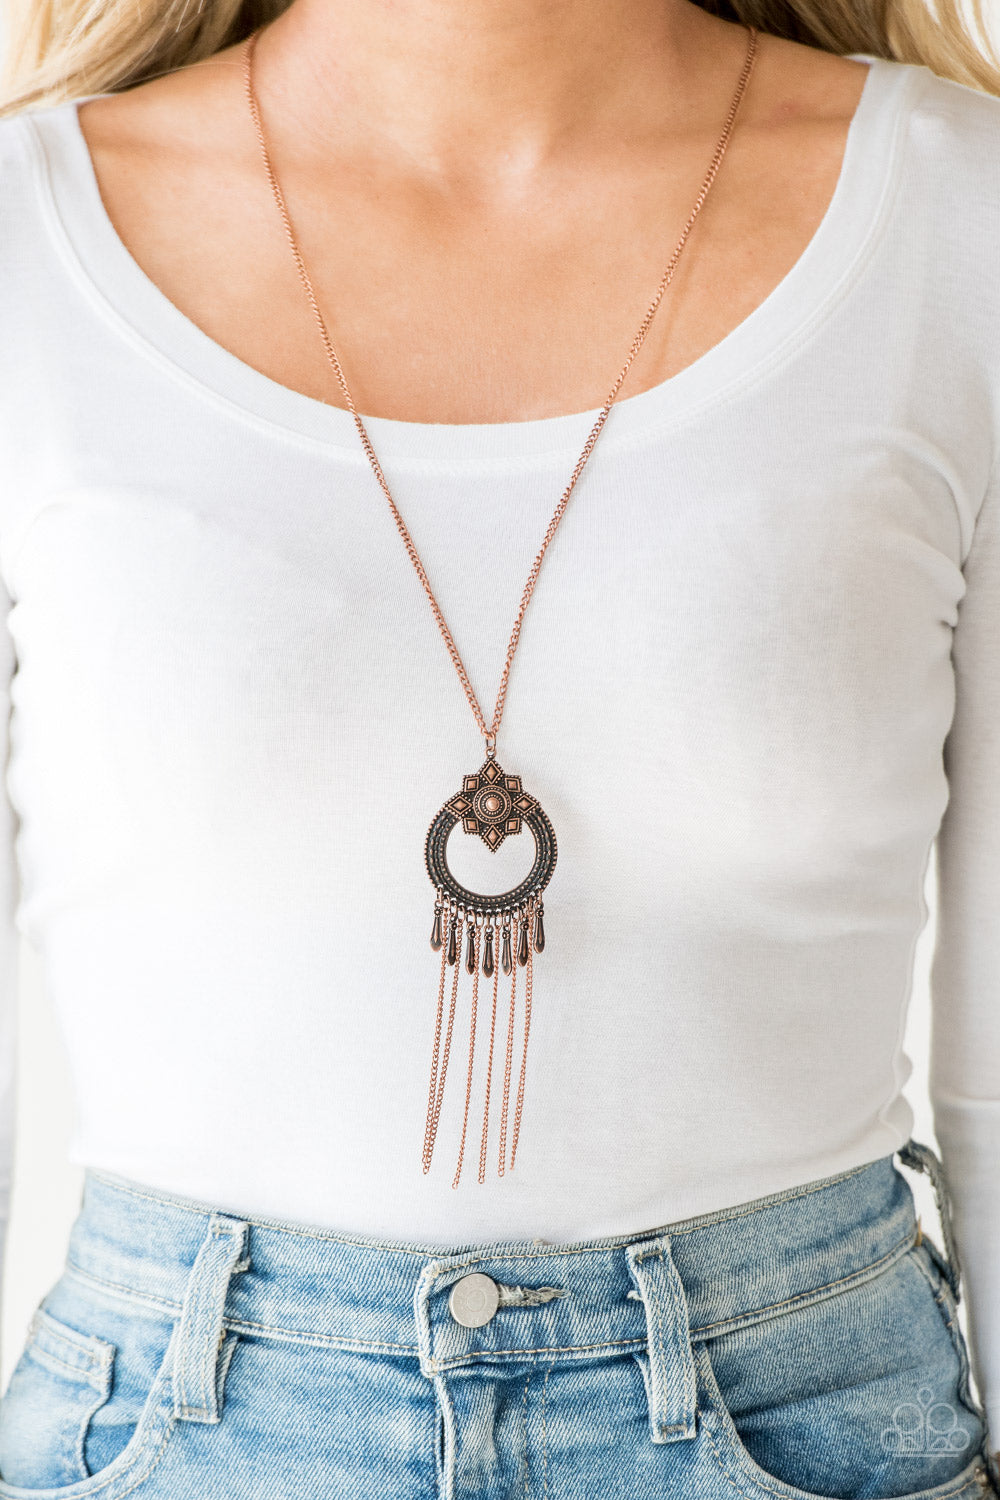 My Main Mantra - copper - Paparazzi necklace